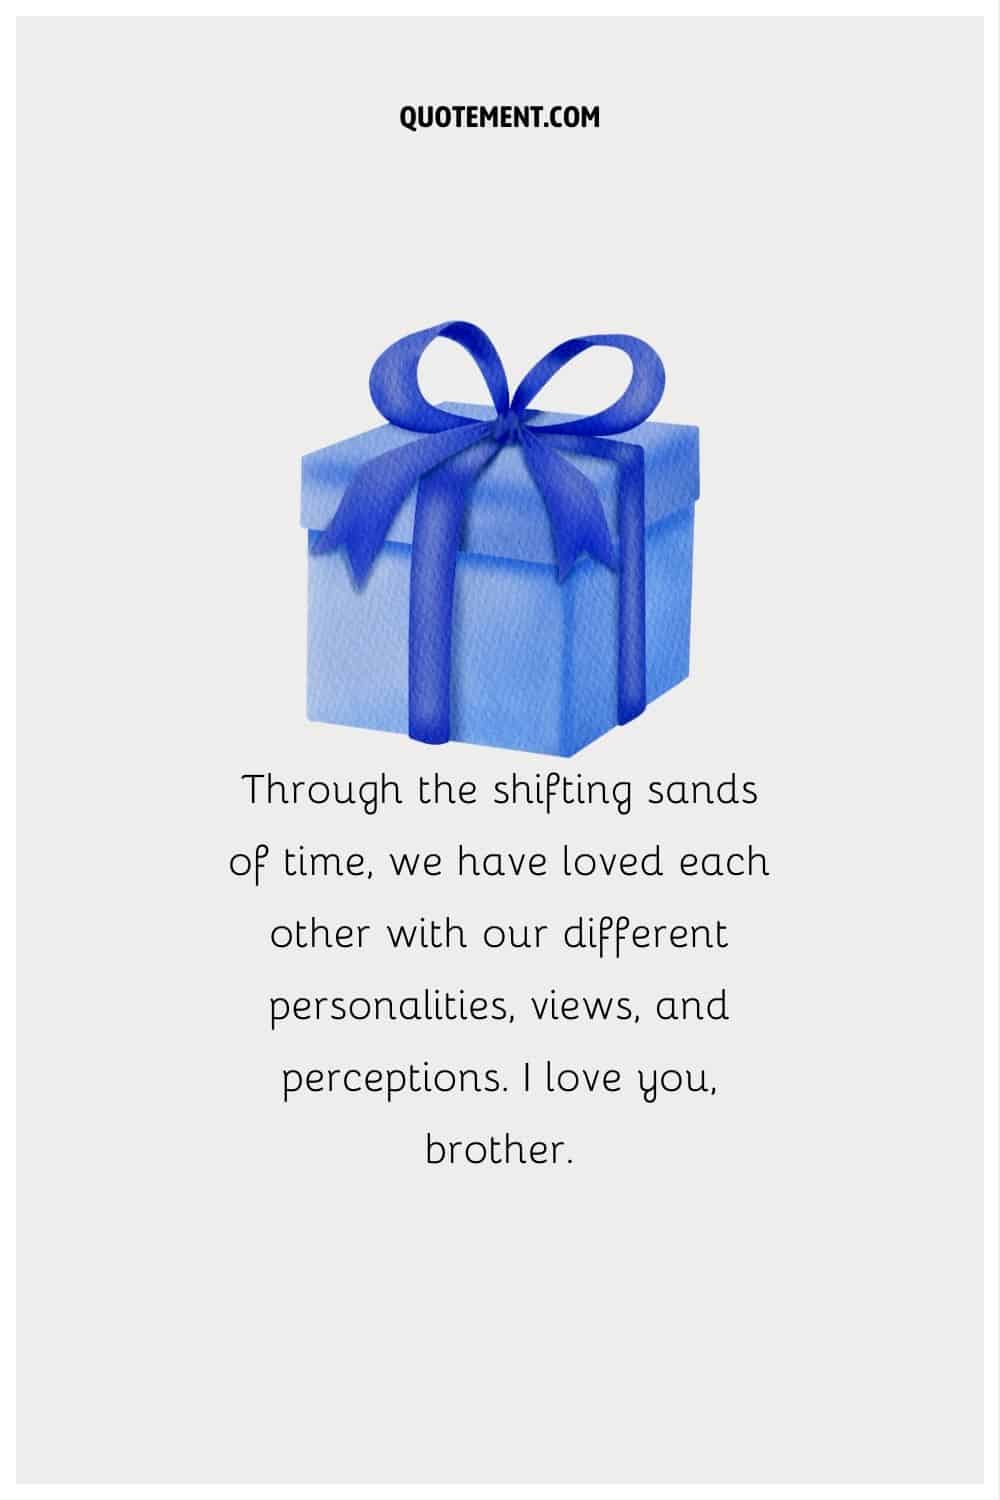 “Through the shifting sands of time, we have loved each other with our different personalities, views, and perceptions. I love you, brother.”